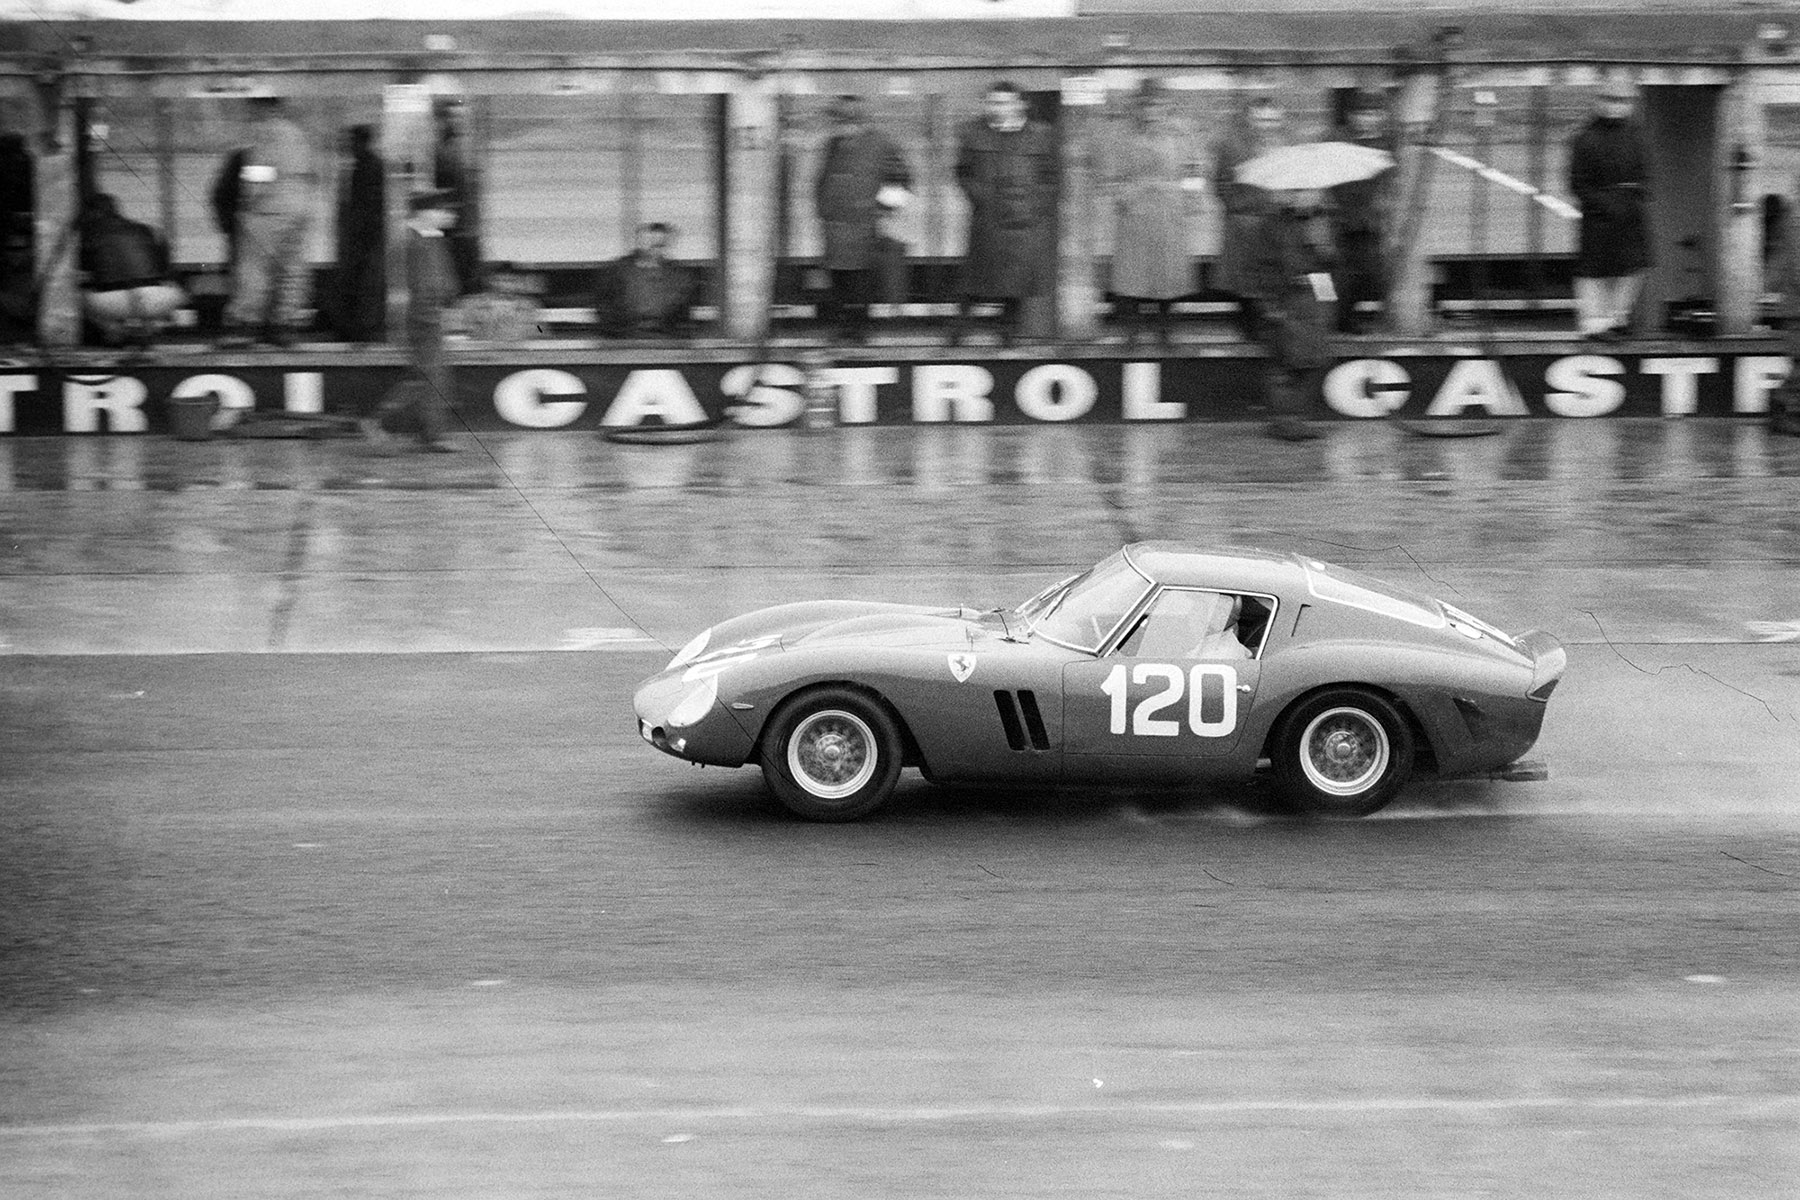 Chassis no. 3765, race #120, driven by Mike Parkes and Willy Mairesse during the Nürburgring 1000 kms at Nürburgring on 27 May 1962.